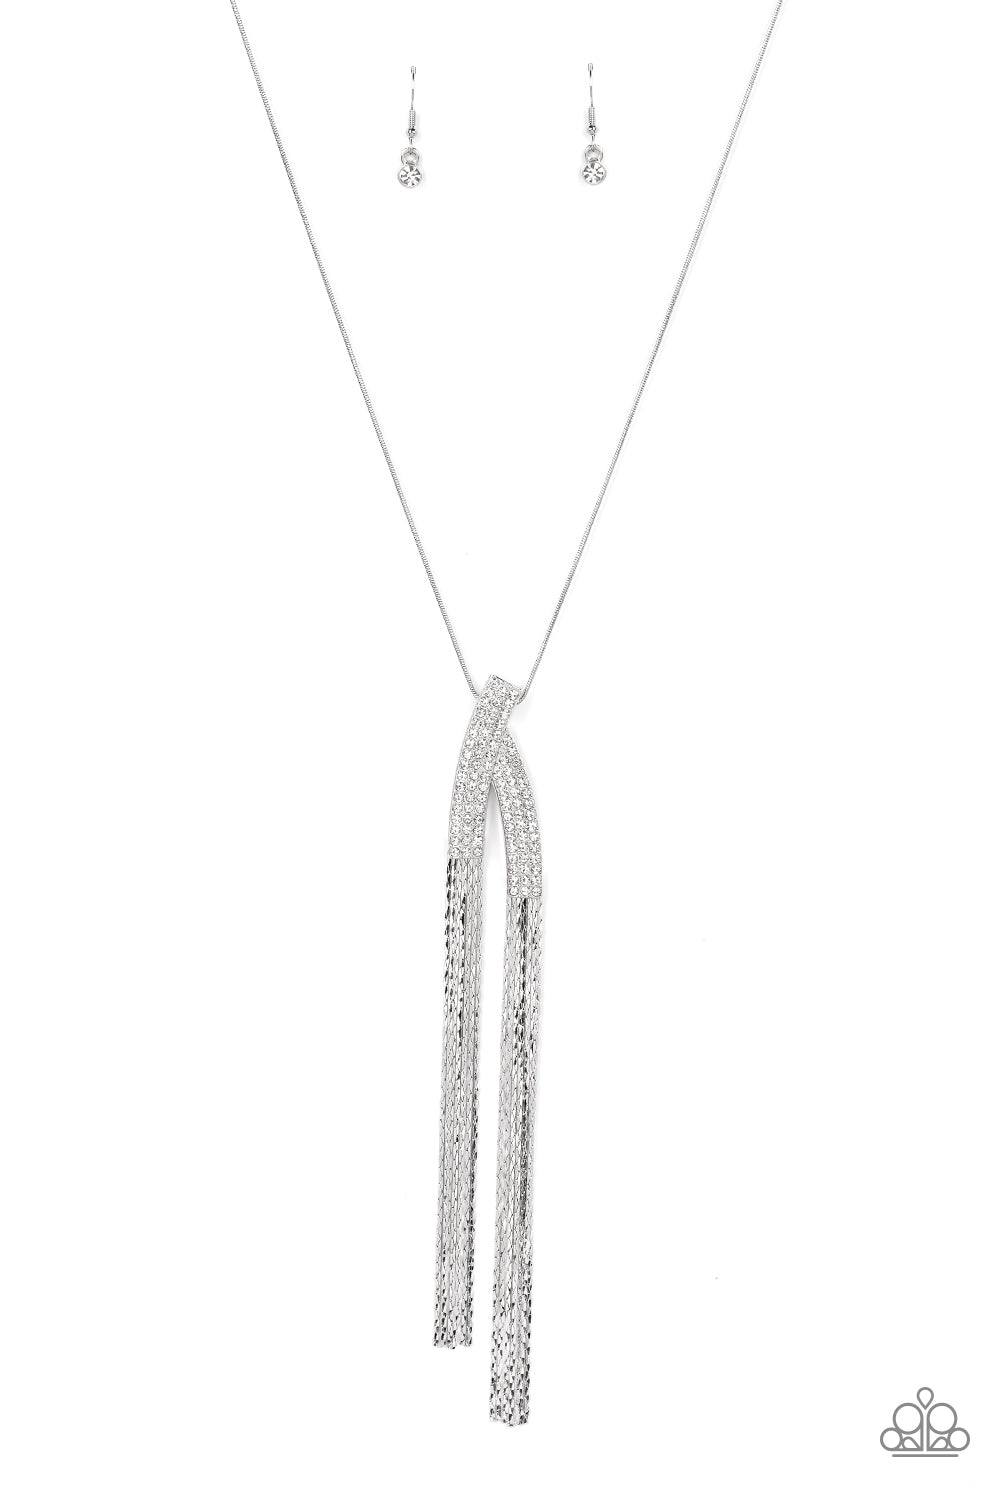 Out of the SWAY - Silver/White rhinestone necklace (June 2022 Life of the Party)